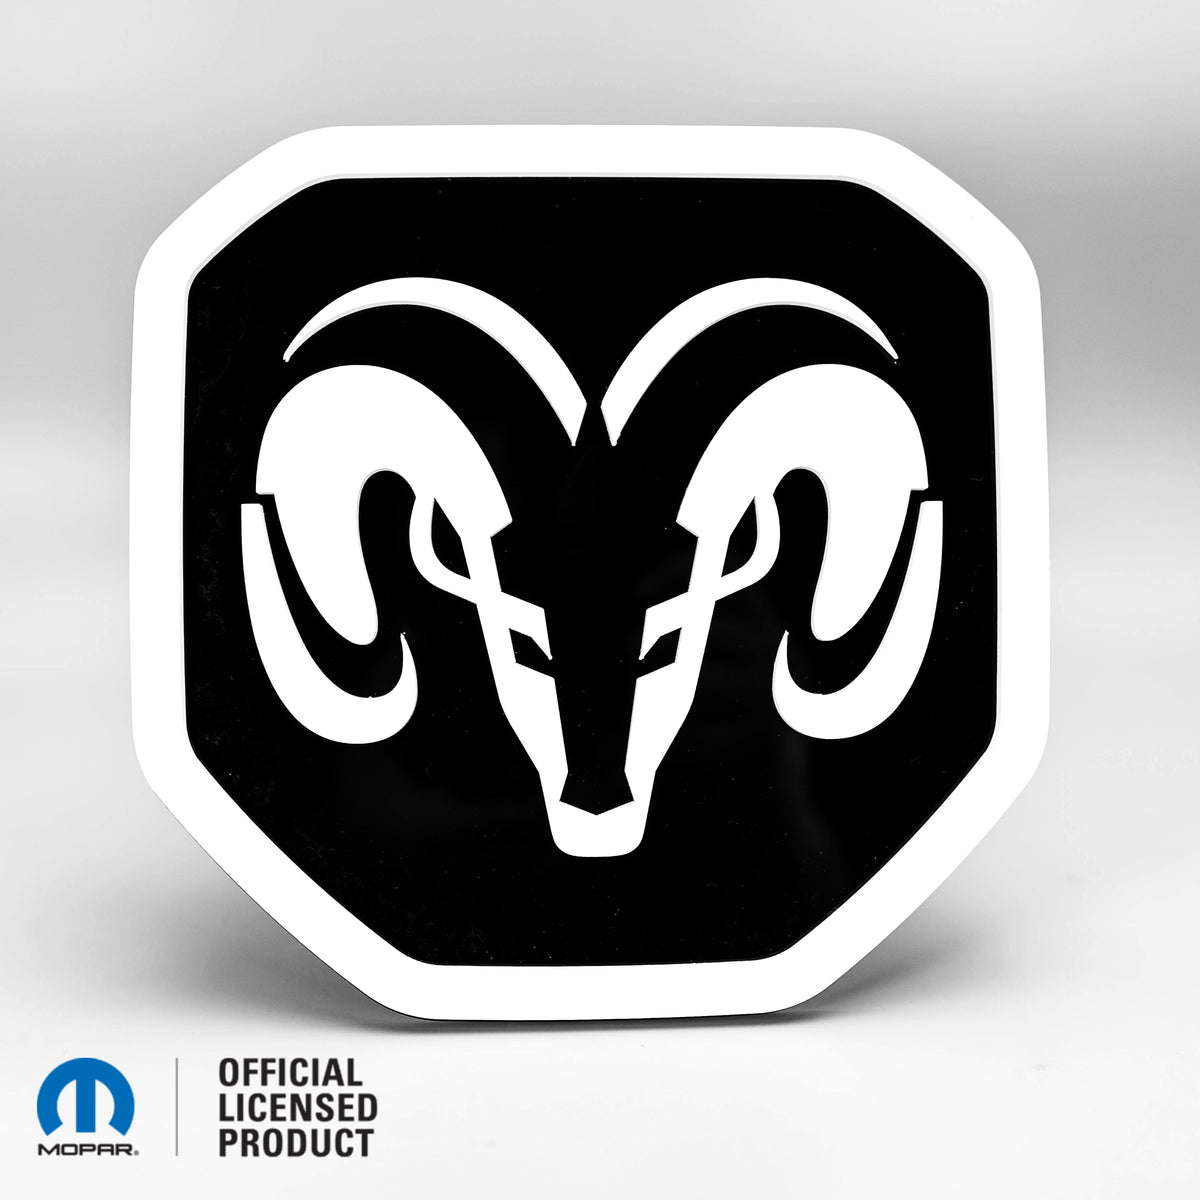 RAM® Head Logo Style 1 Tailgate Badge - Fits 2019+ RAM® Tailgate - 1500, 2500, 3500 - WHITE on GLOSS - Officially Licensed Product